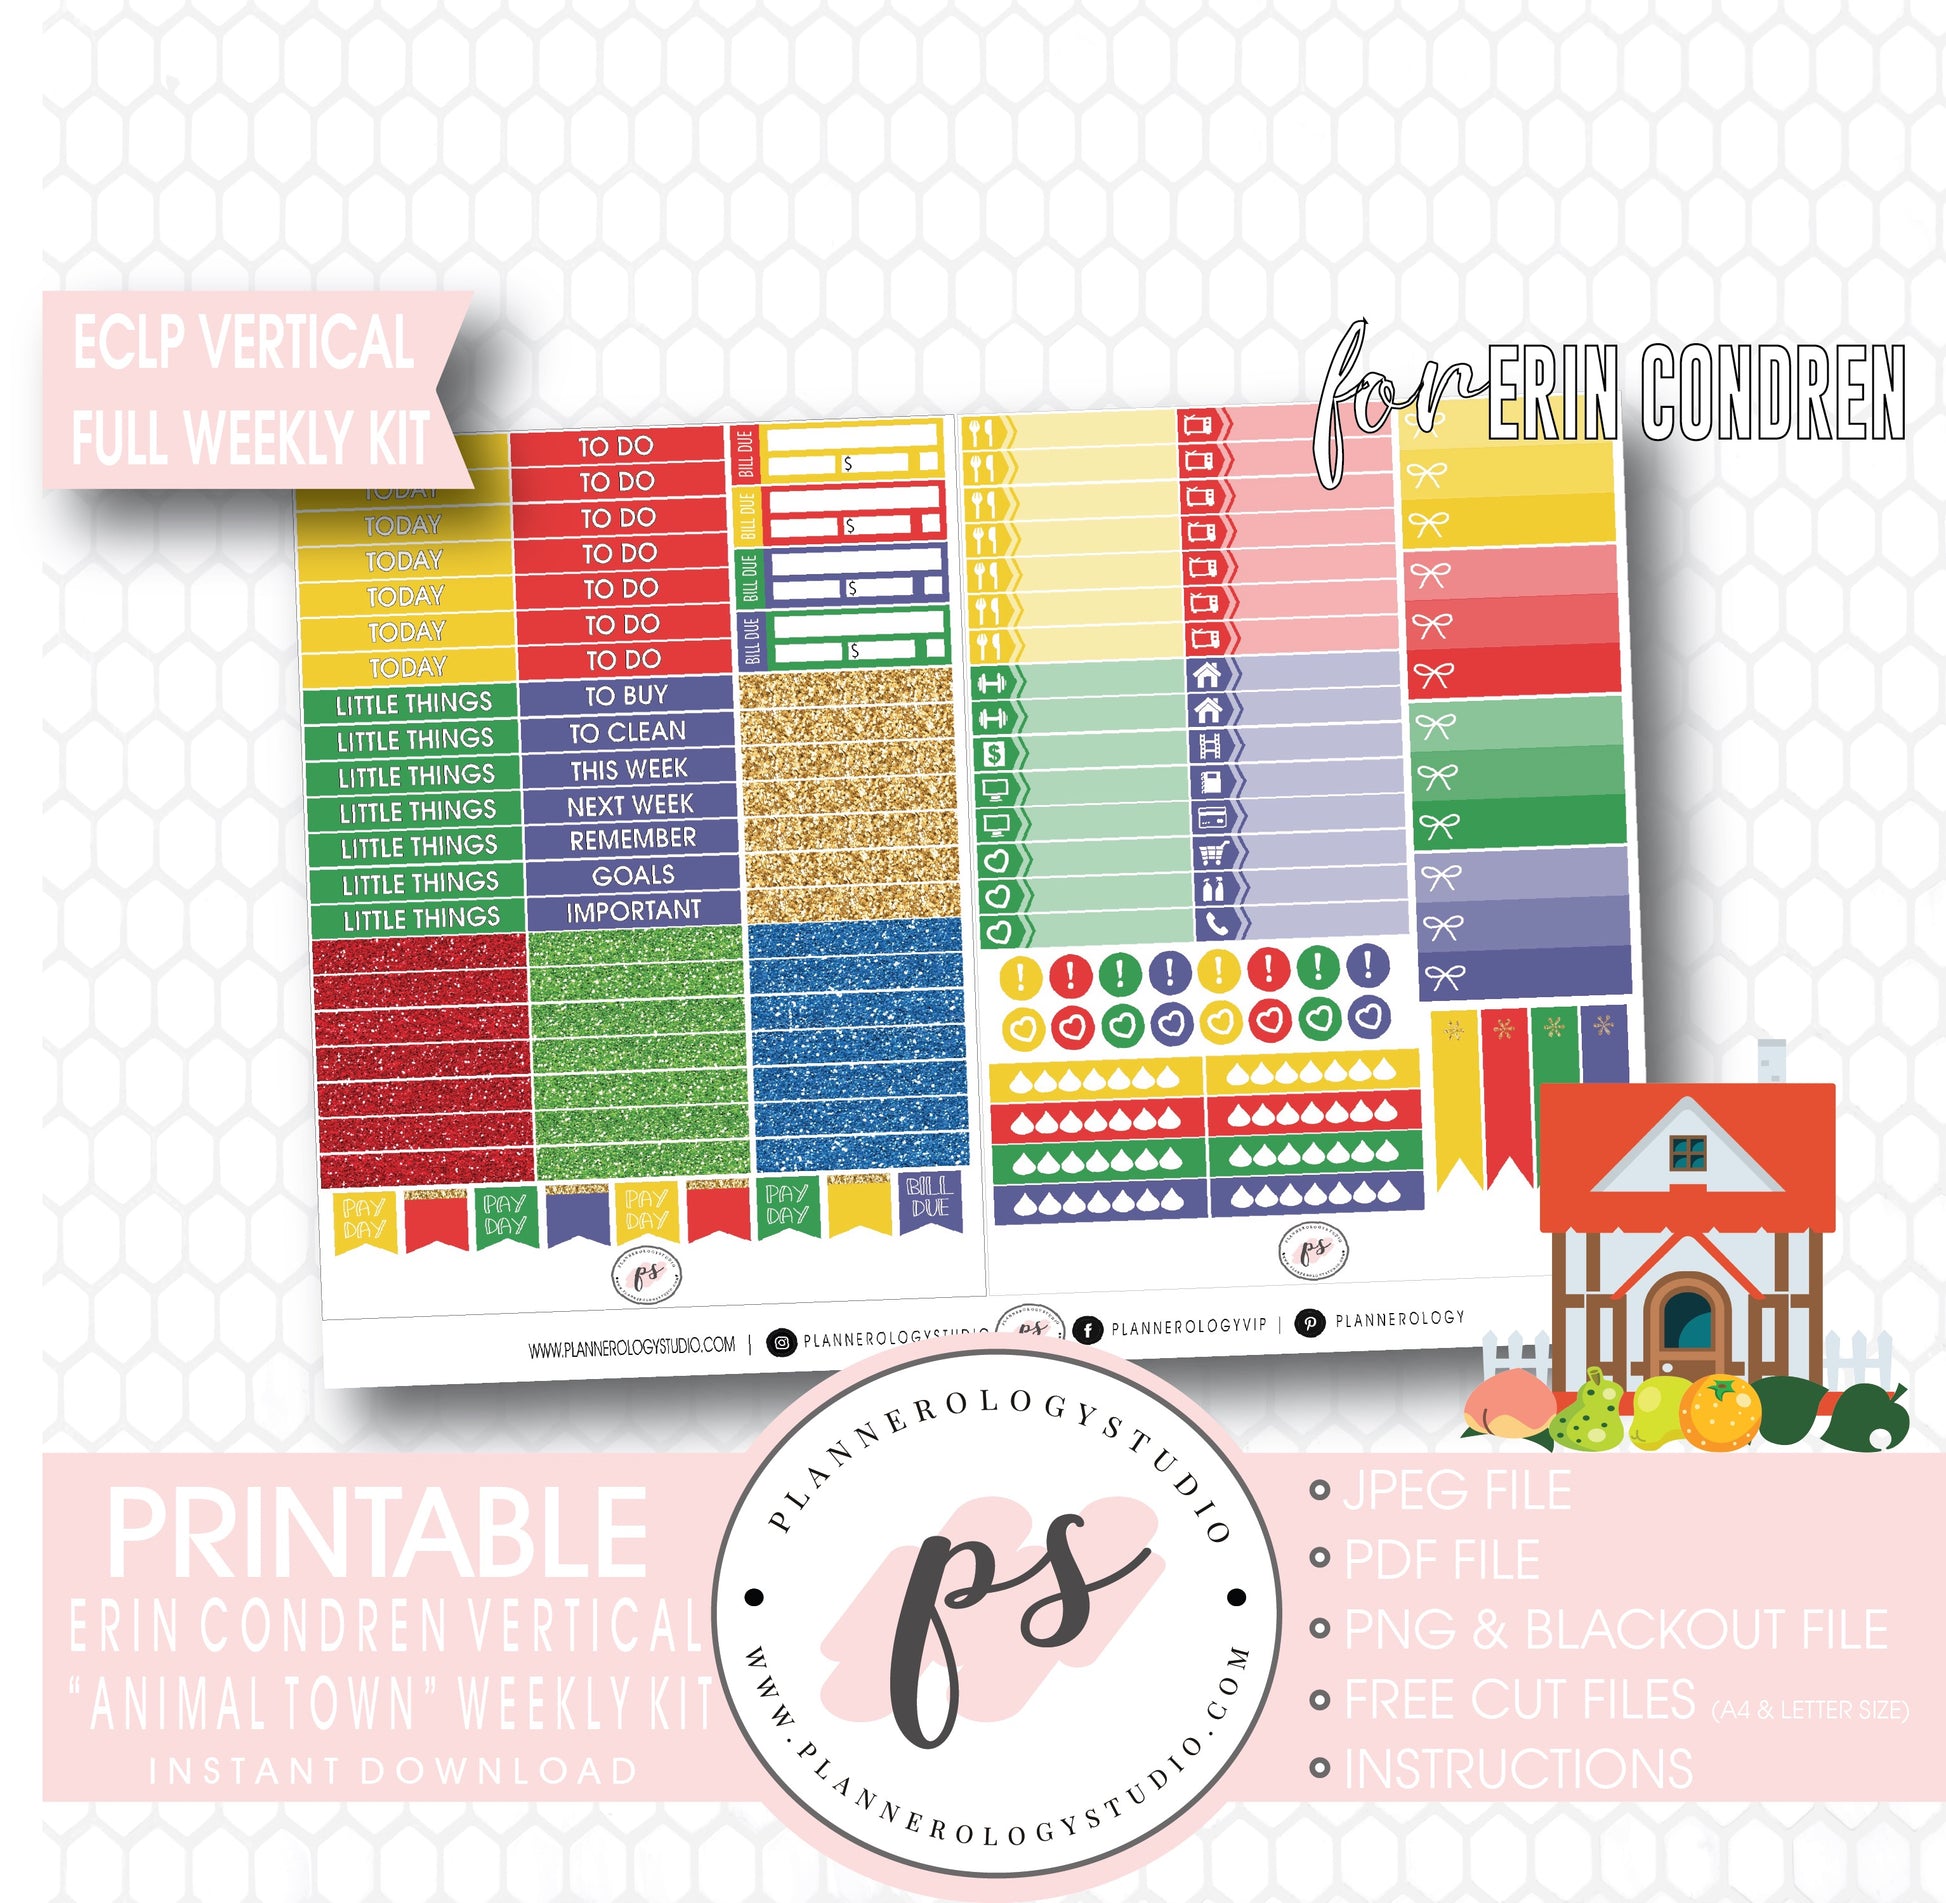 Animal Town (Animal Crossing Inspired) Full Weekly Kit Printable Planner Digital Stickers (for use with Erin Condren Vertical) - Plannerologystudio